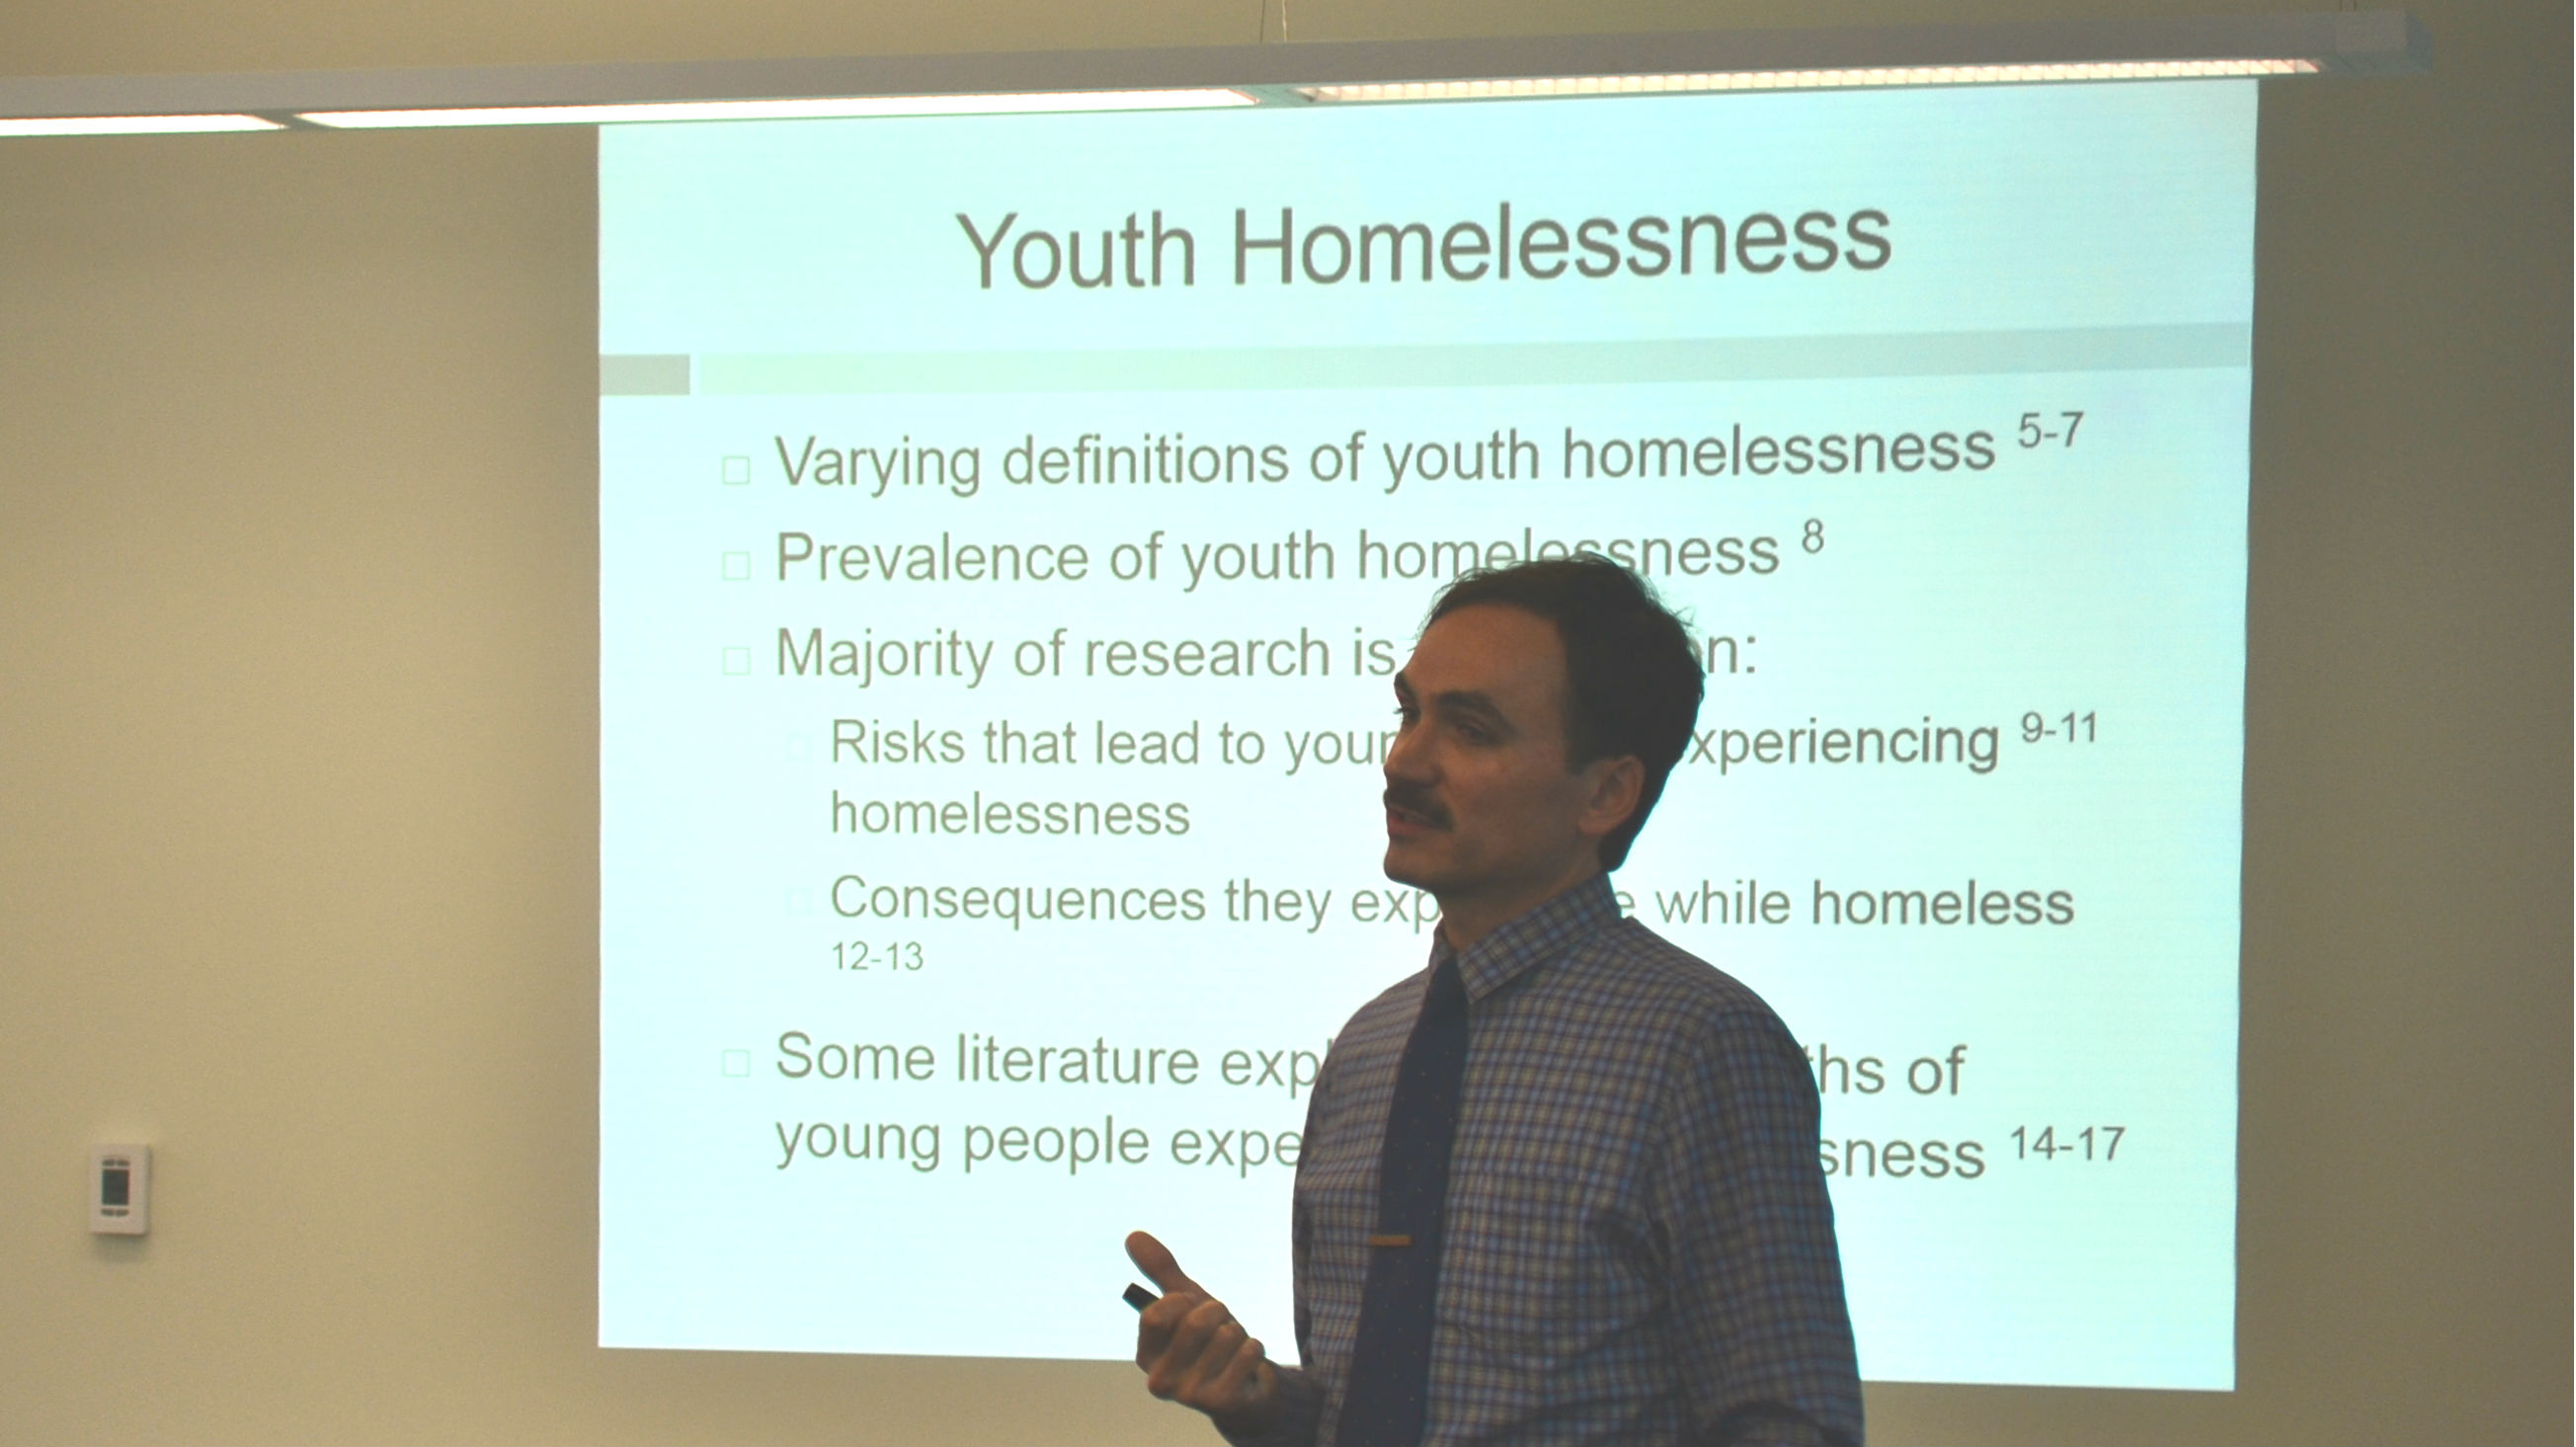 Music-based Services for Young People Experiencing Homelessness